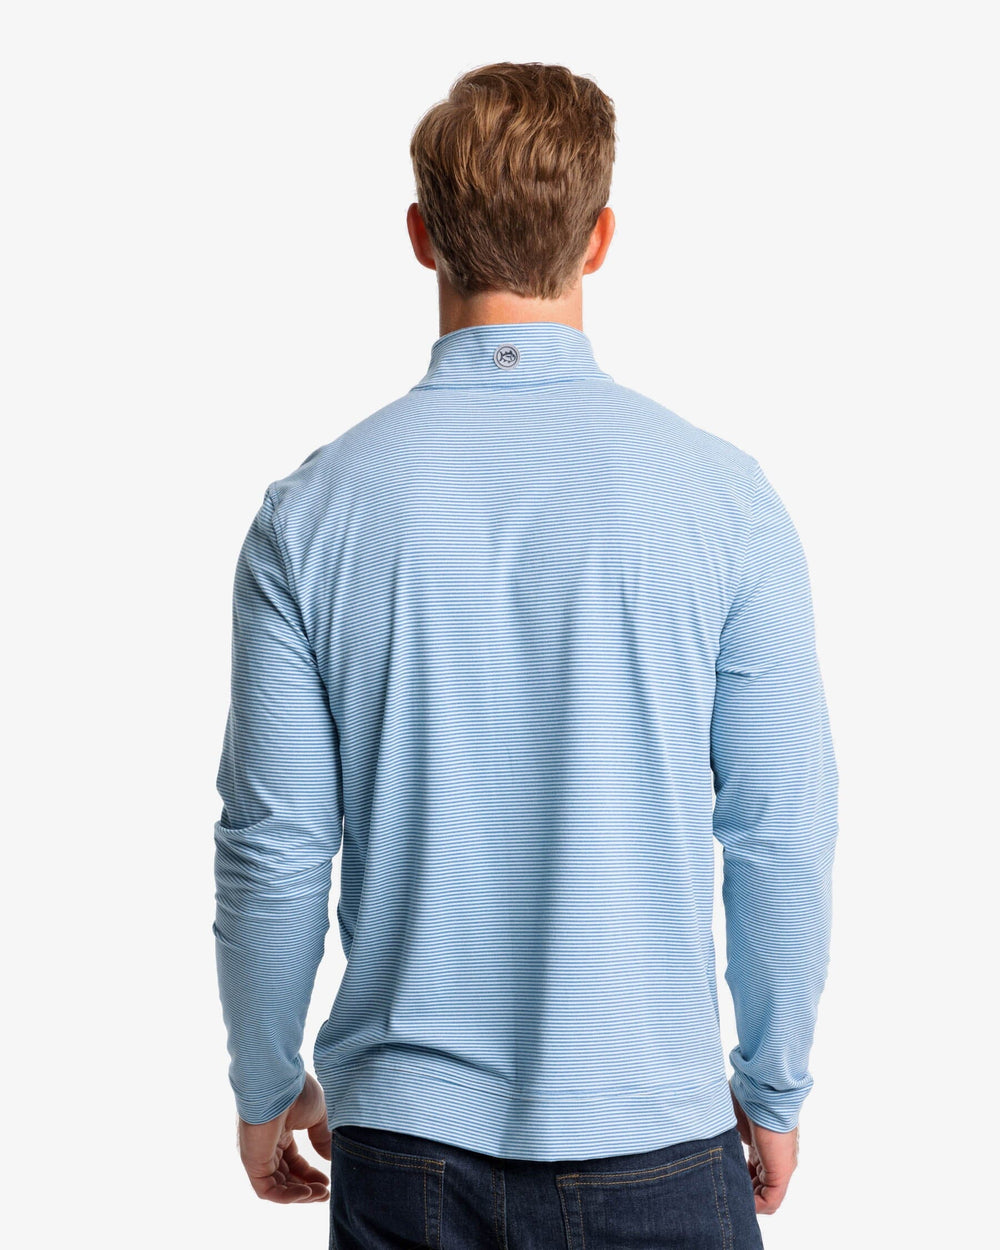 The back view of the Southern Tide Cruiser Heather Micro-Stripe Performance Quarter Zip by Southern Tide - Heather Atlantic Blue